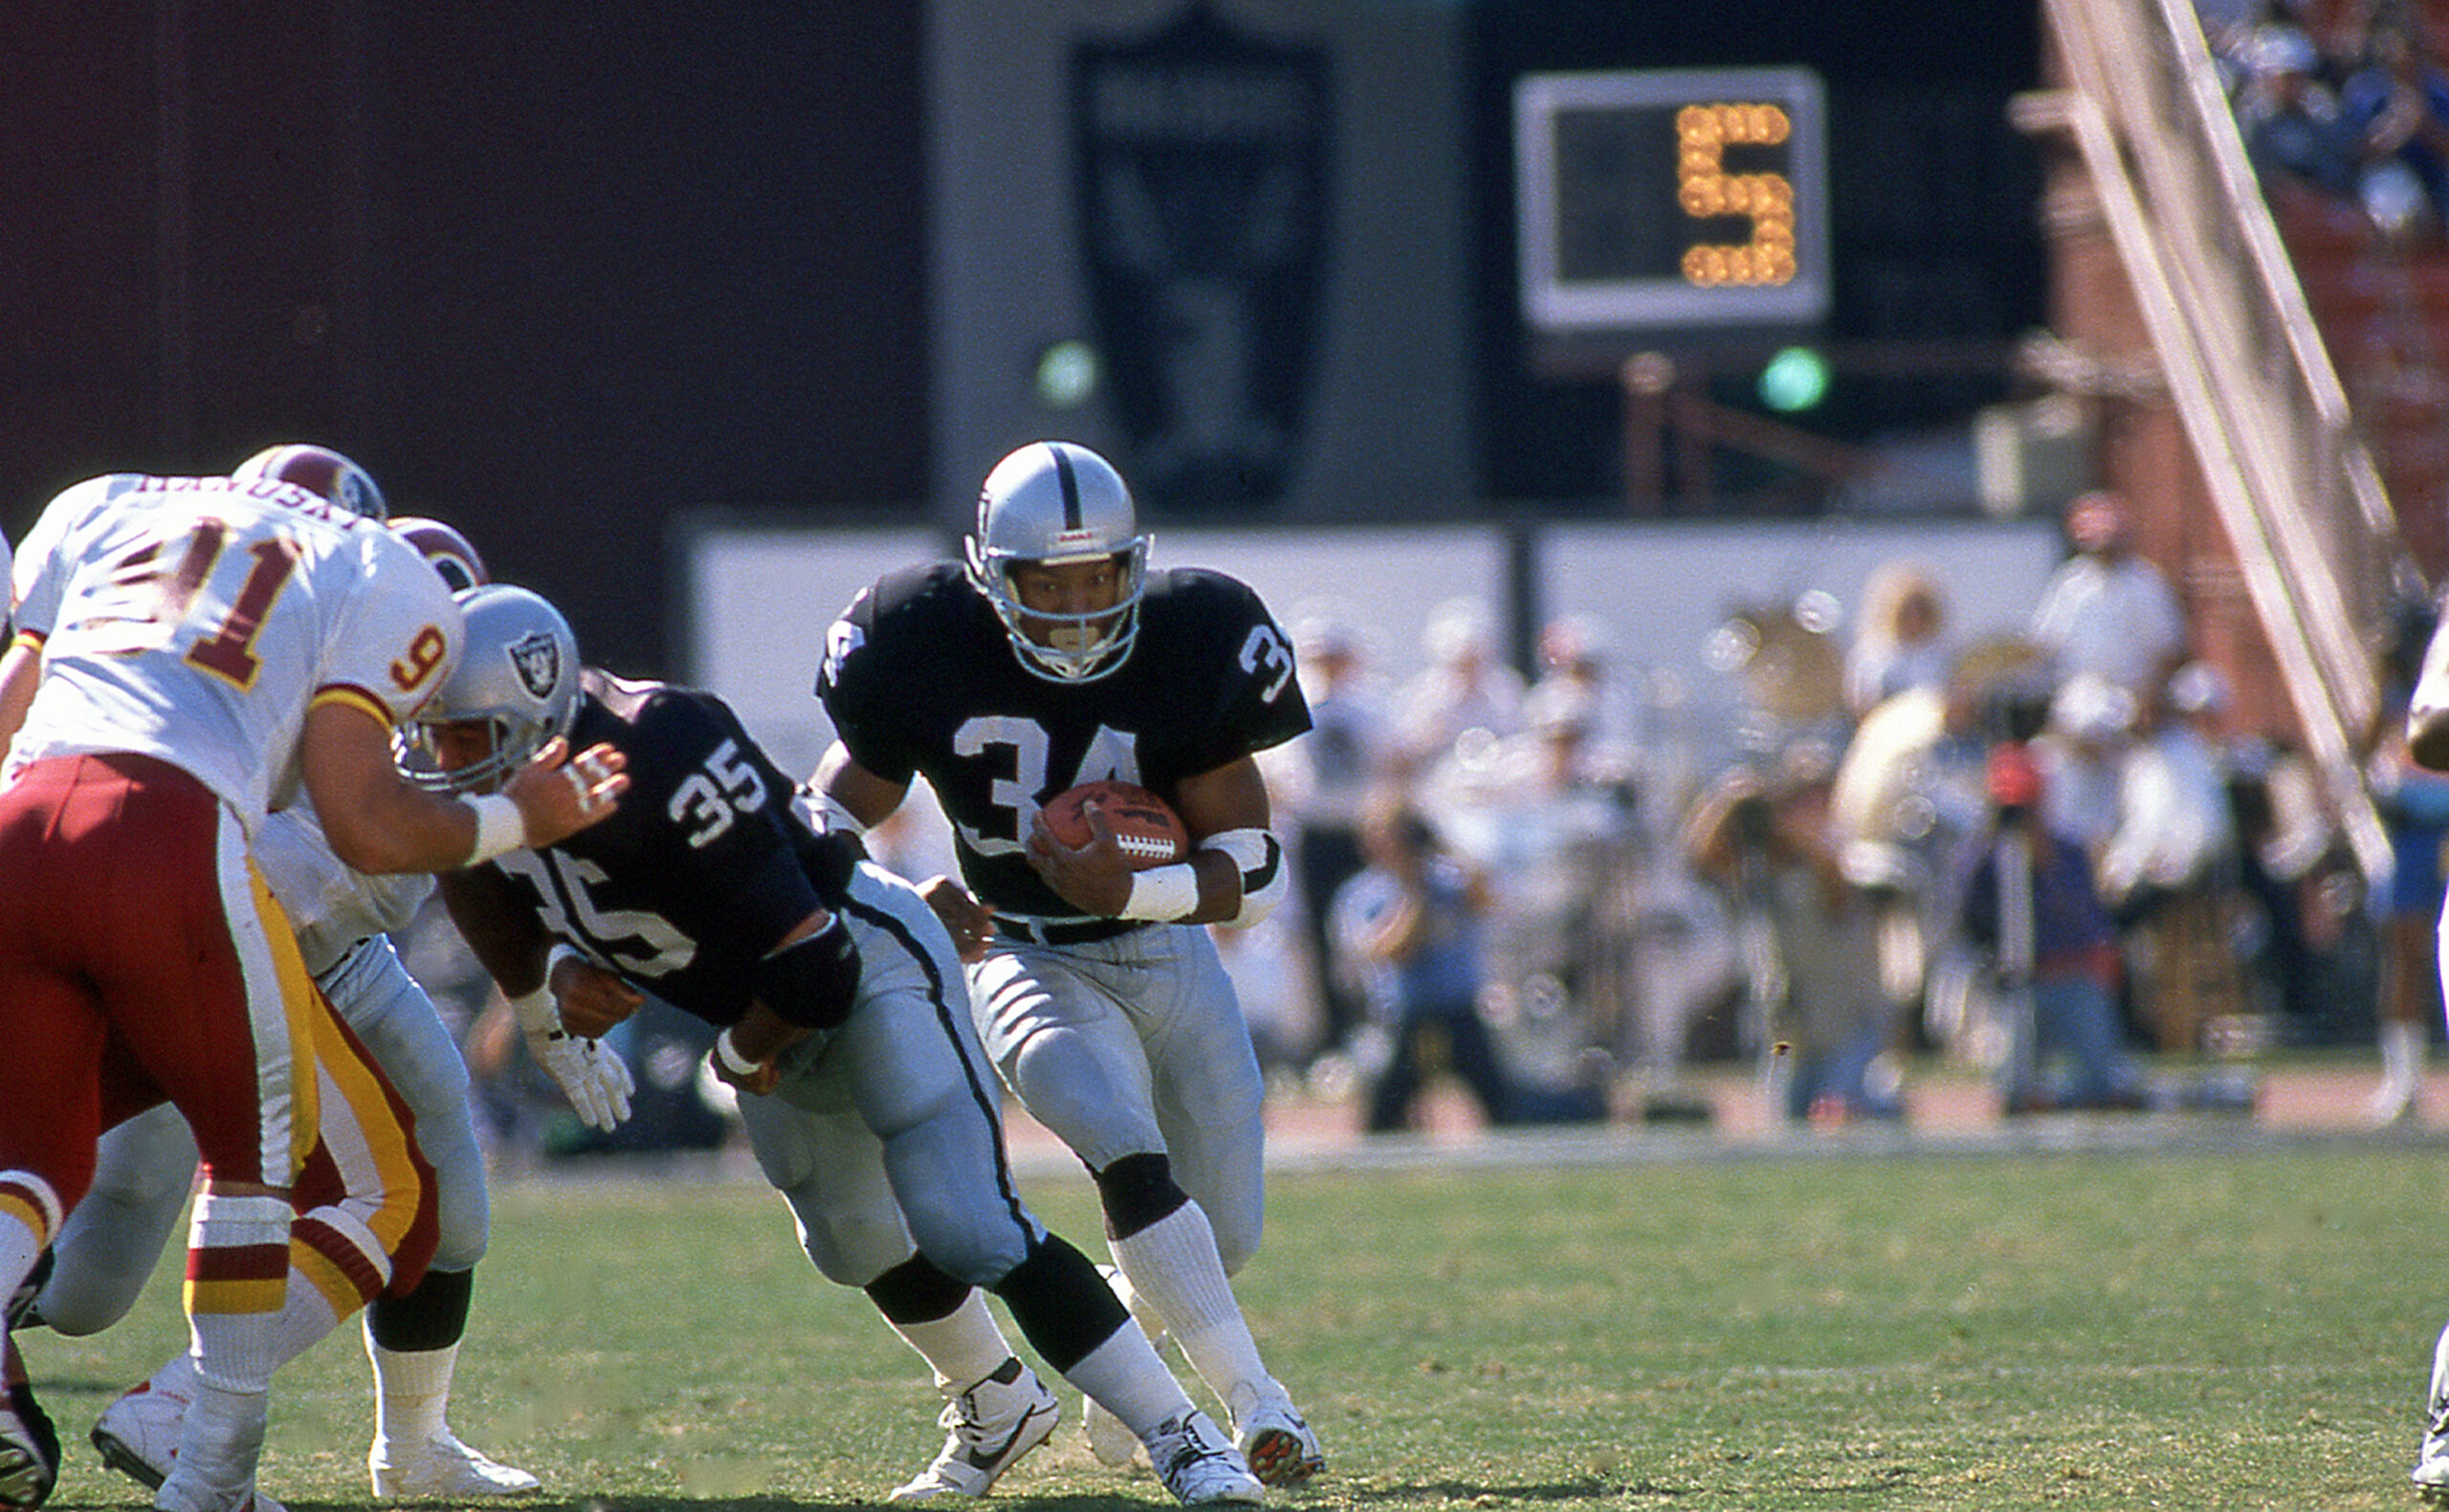 LOS ANGELES, CA - CIRCA 1987: Bo Jackson of the Los Angeles Raiders rushes against the Washington Redskins at the Coliseum circa 1987 in Los Angeles, California.  (Photo by Owen C. Shaw/Getty Images)